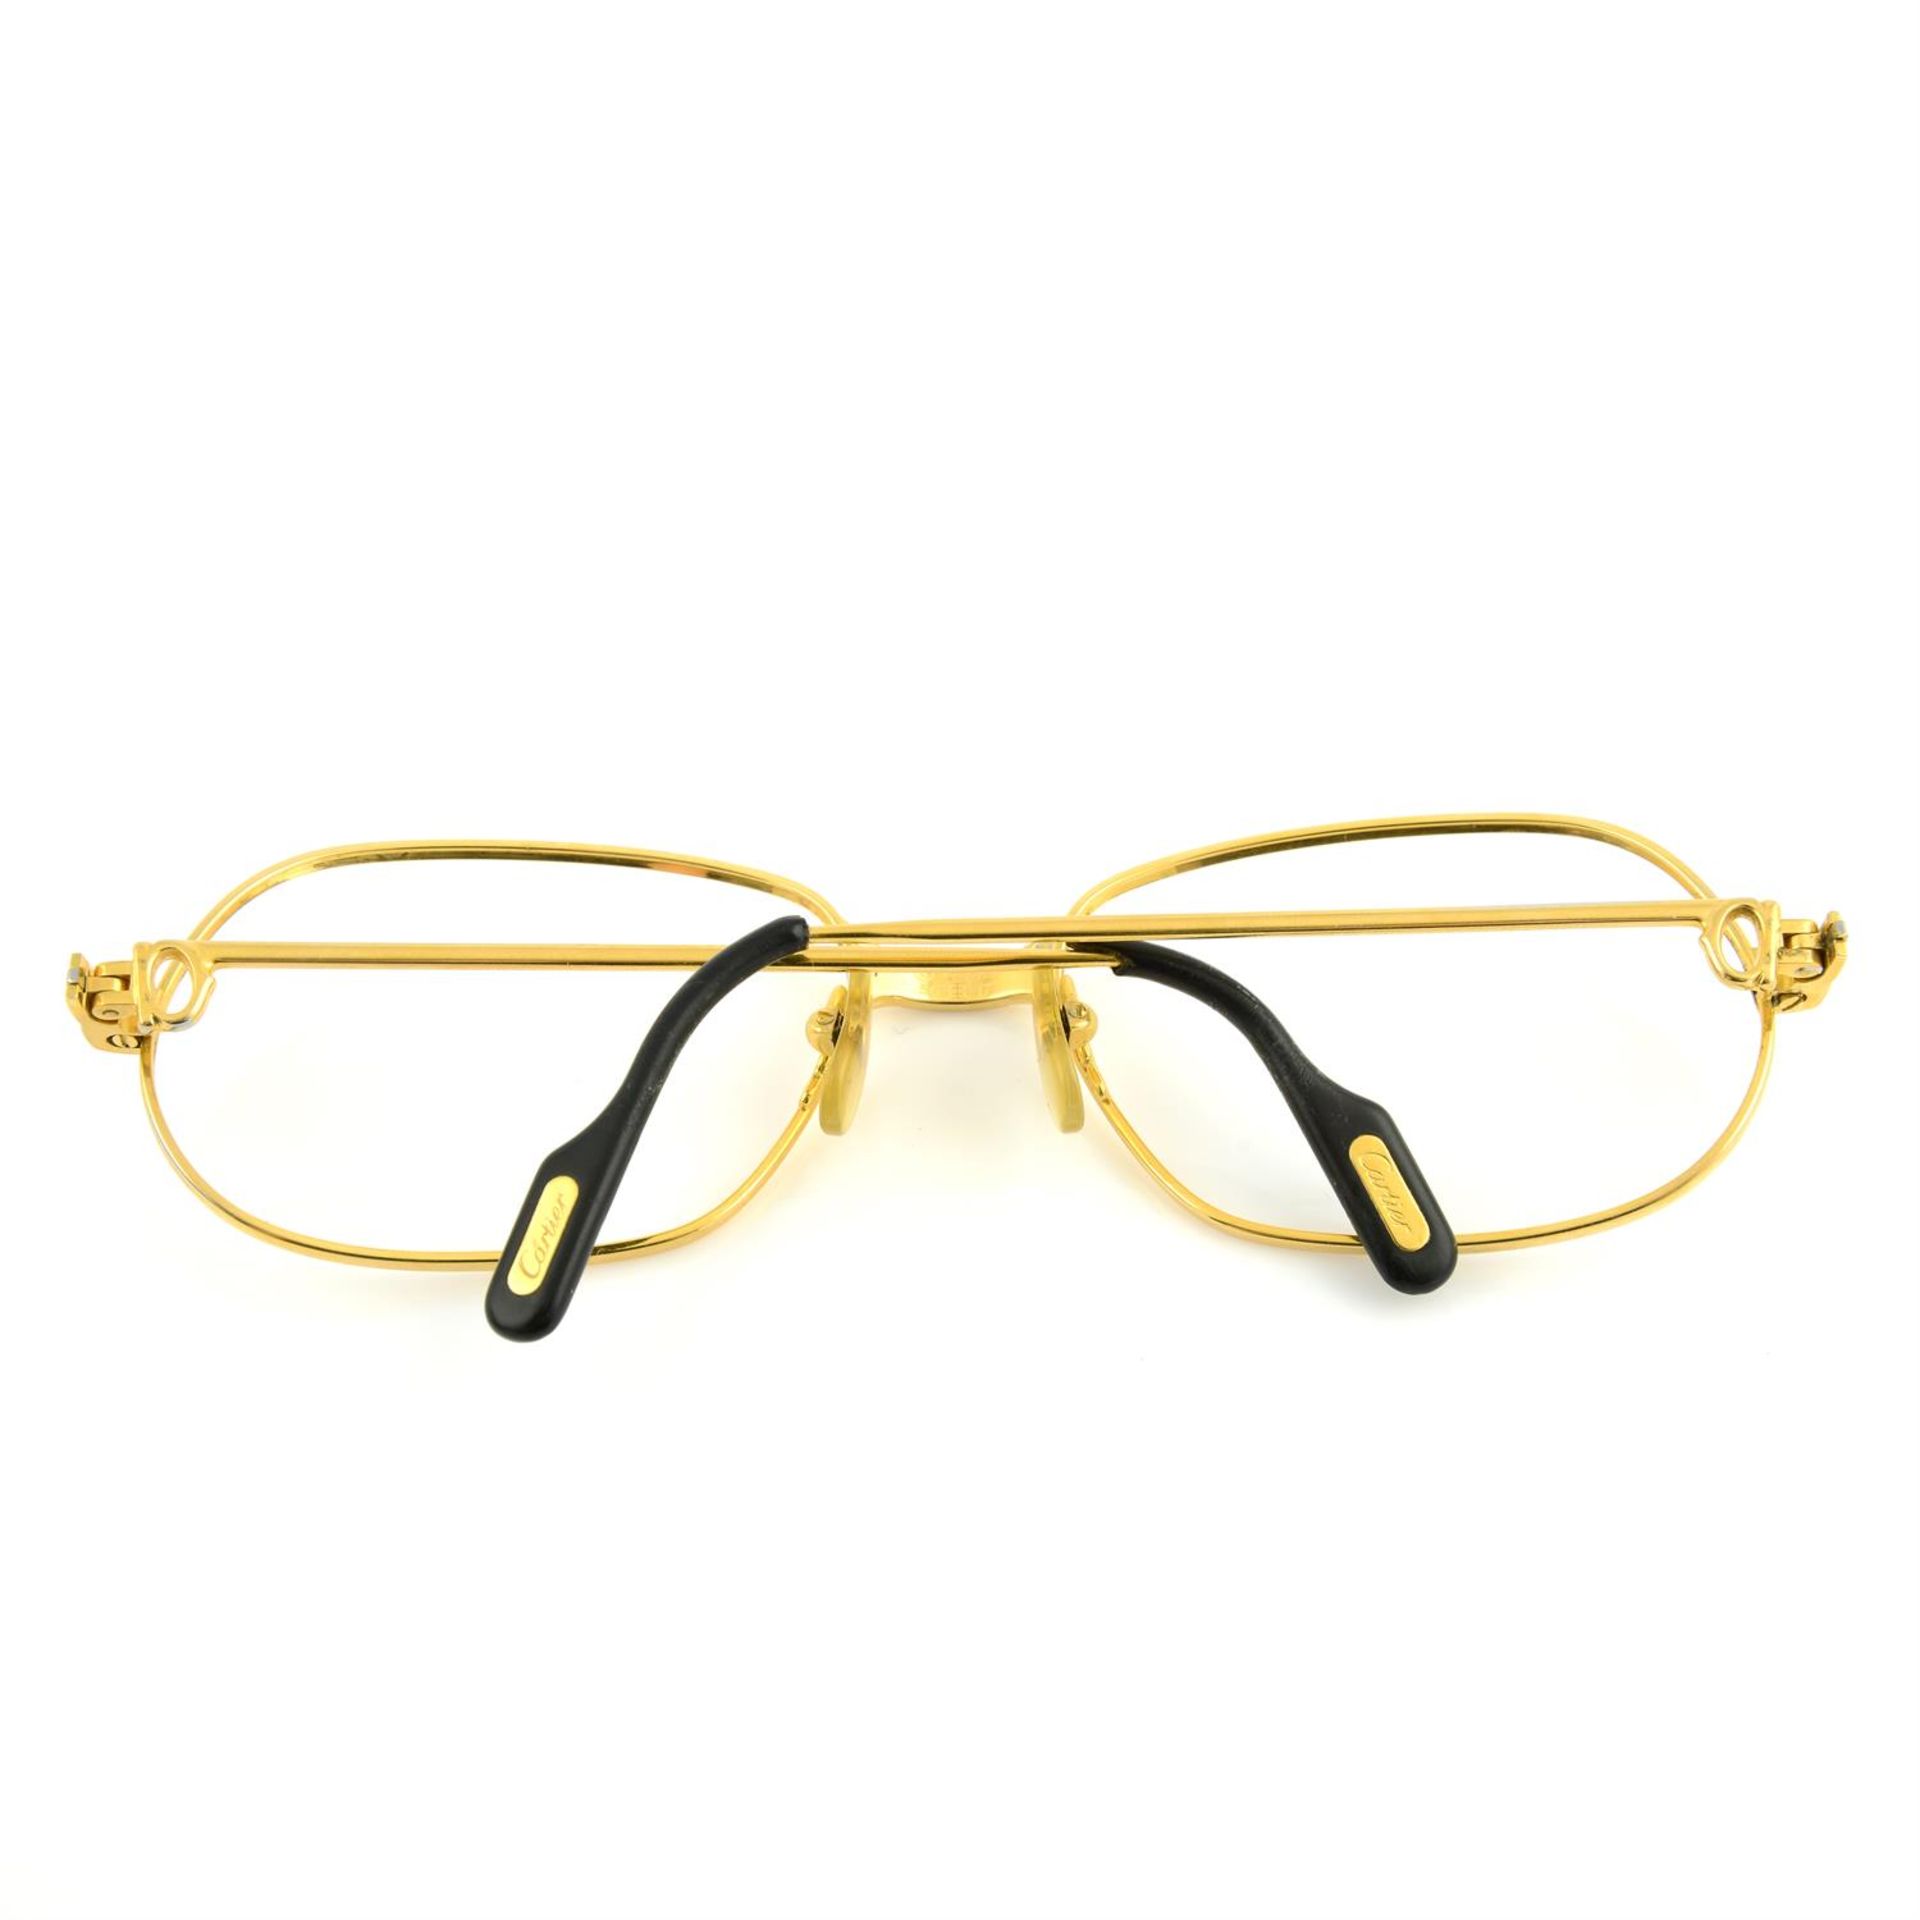 CARTIER - a pair of Panthère glasses frames. - Image 2 of 3